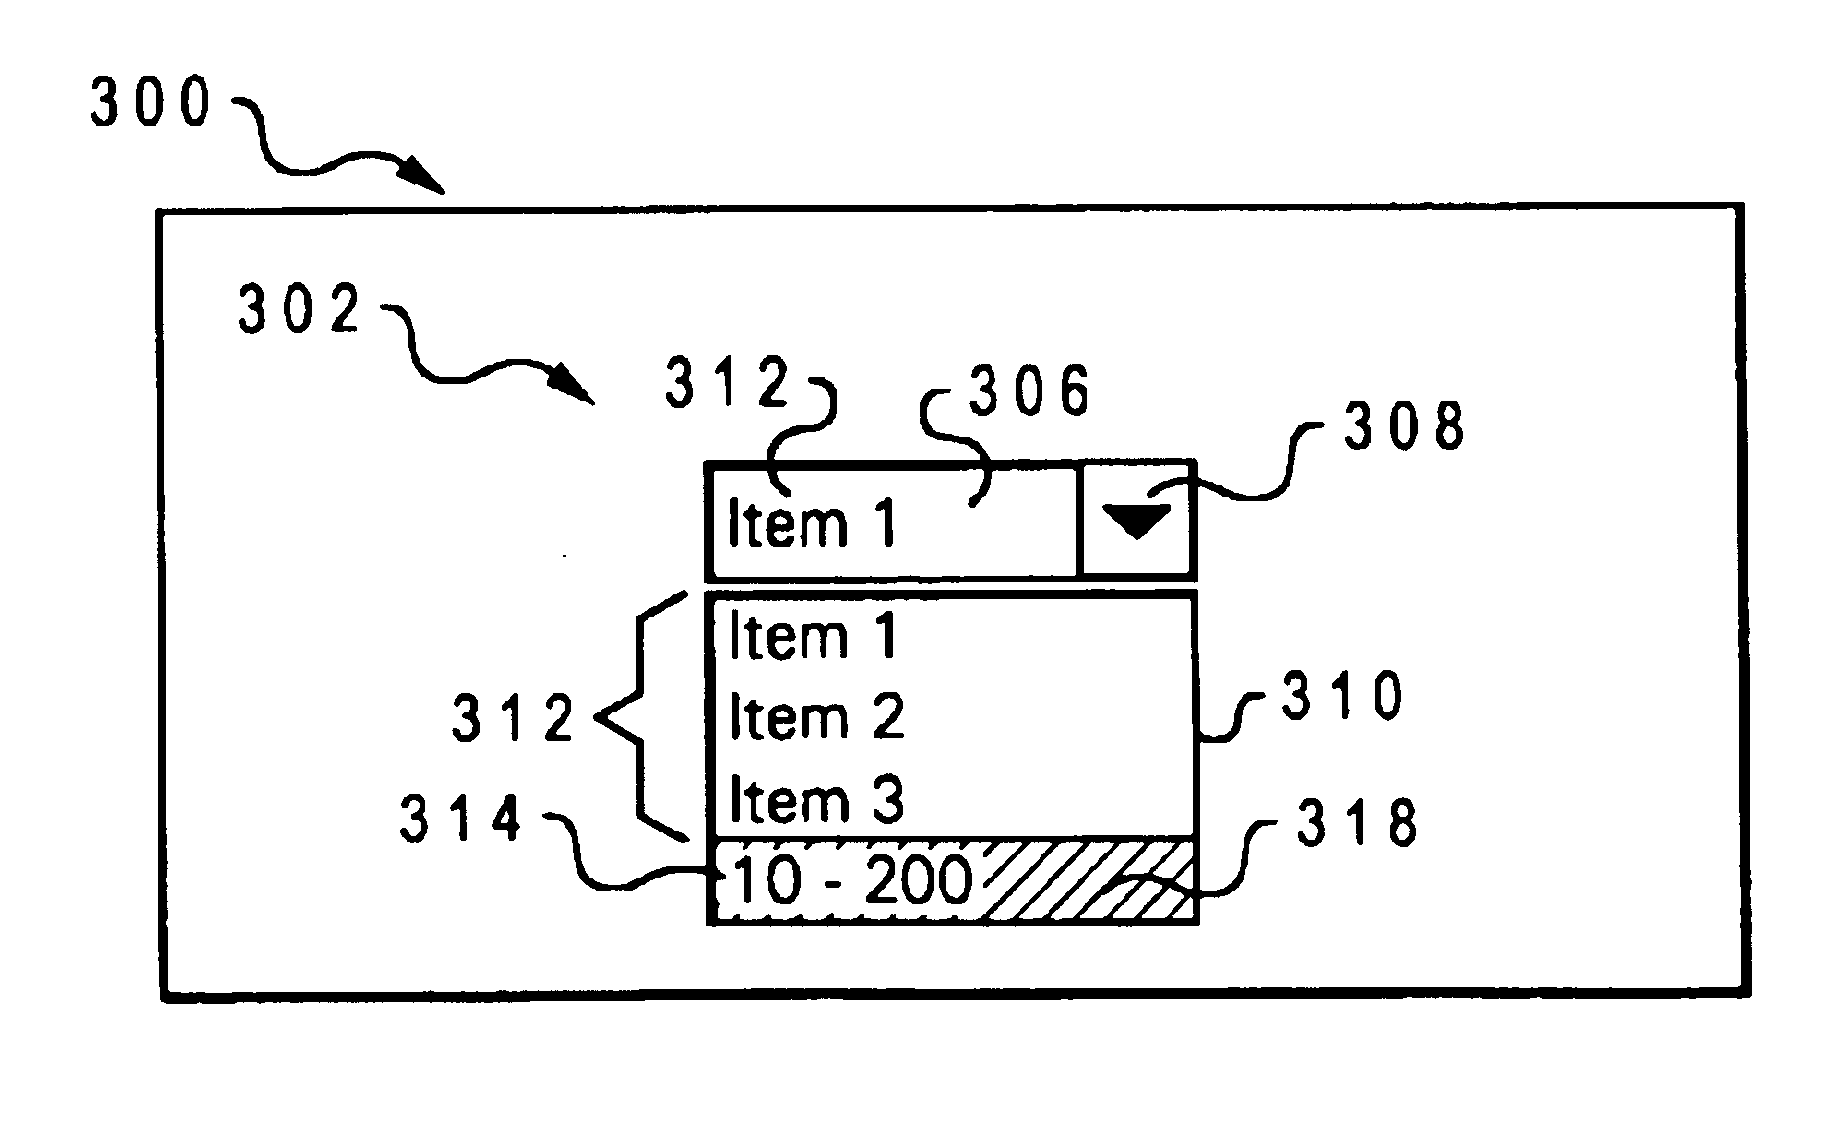 Mixed mode input for a graphical user interface (GUI) of a data processing system